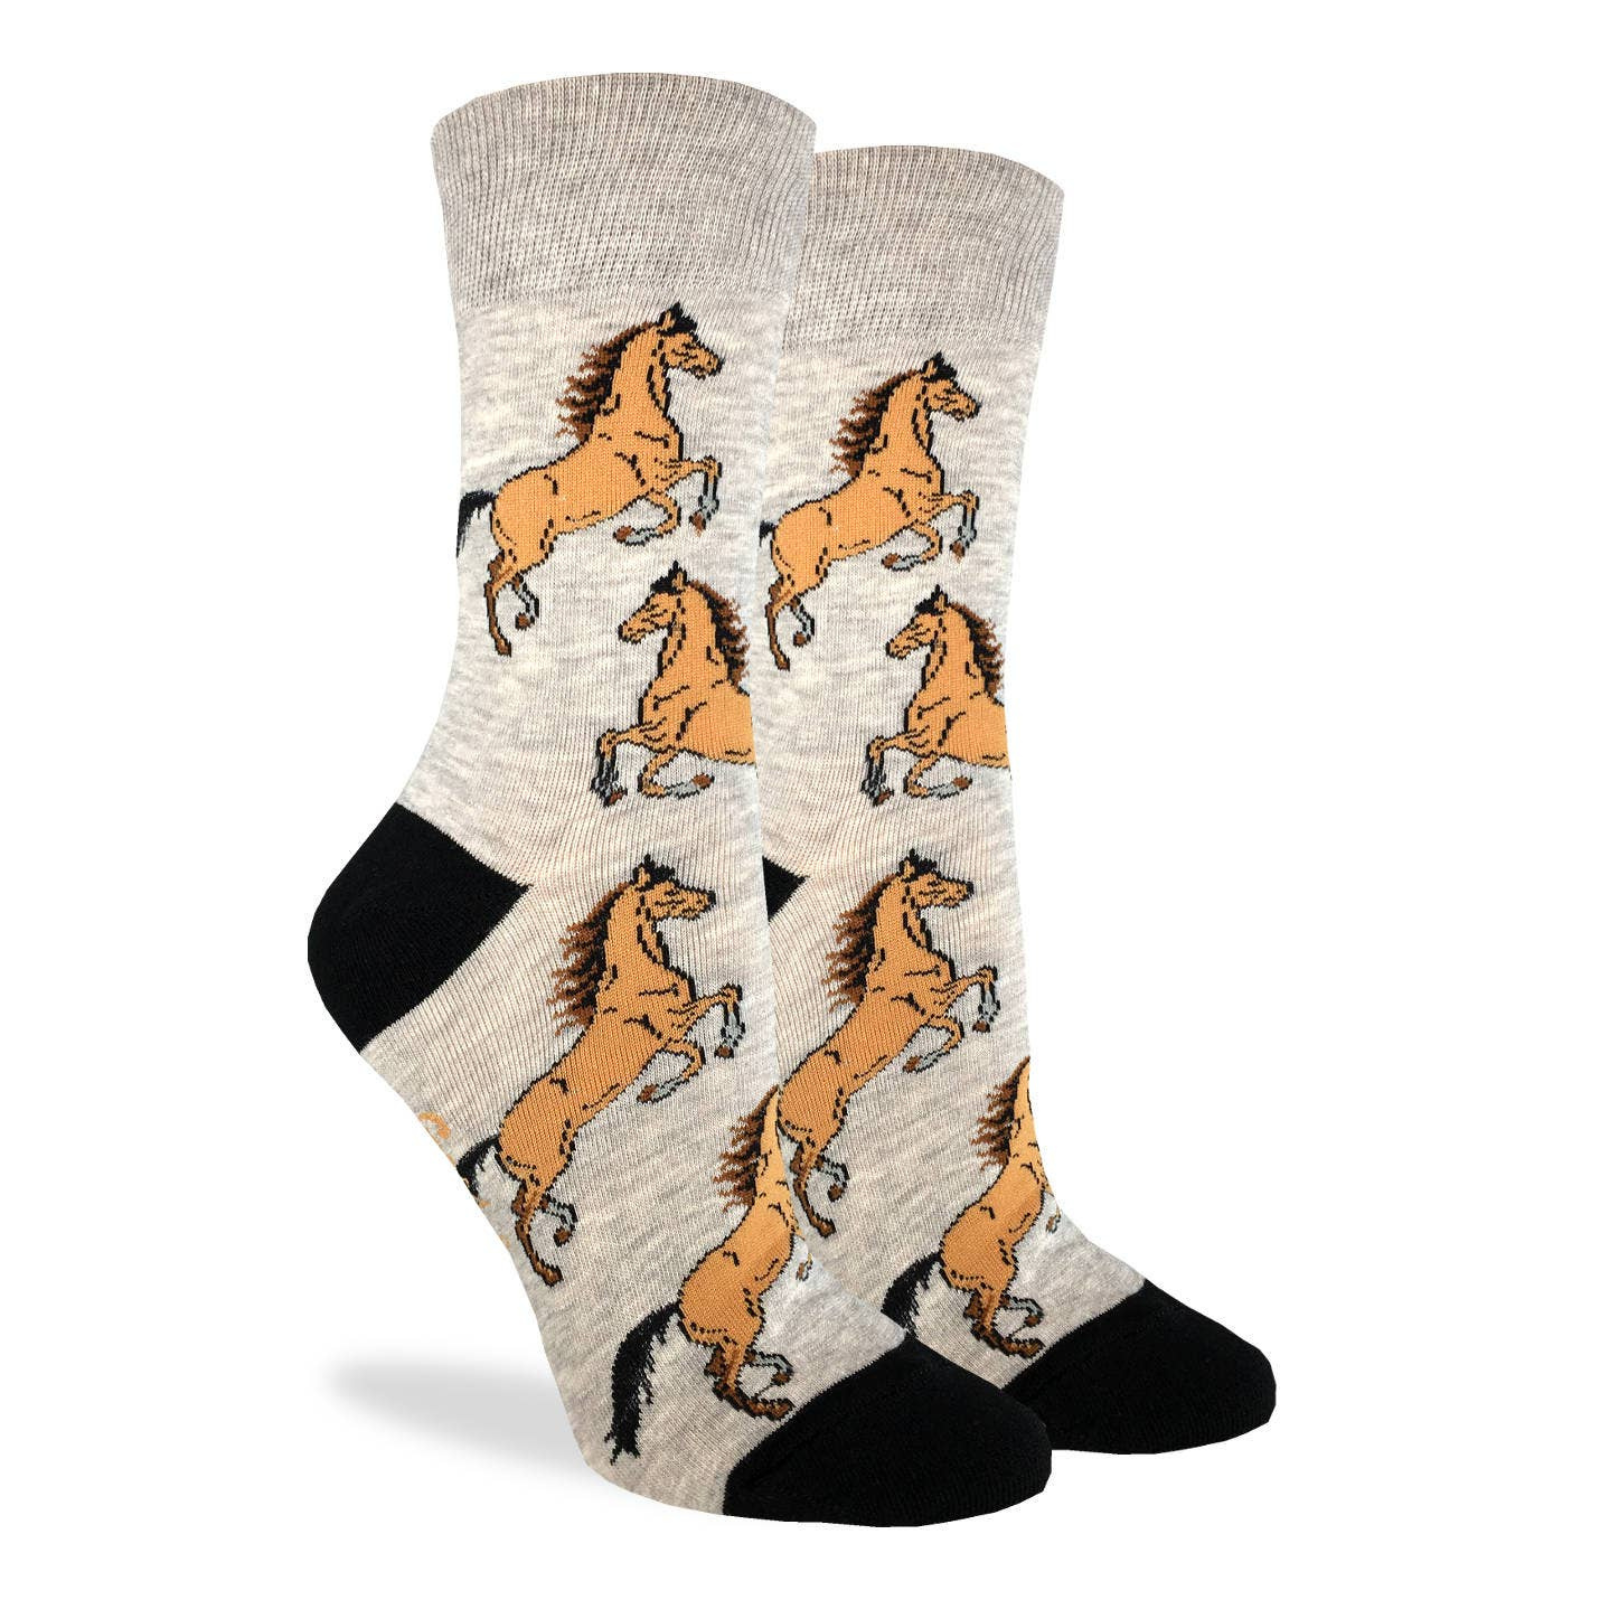 Good Luck Sock women's gray crew sock with brown horses all over on display feet